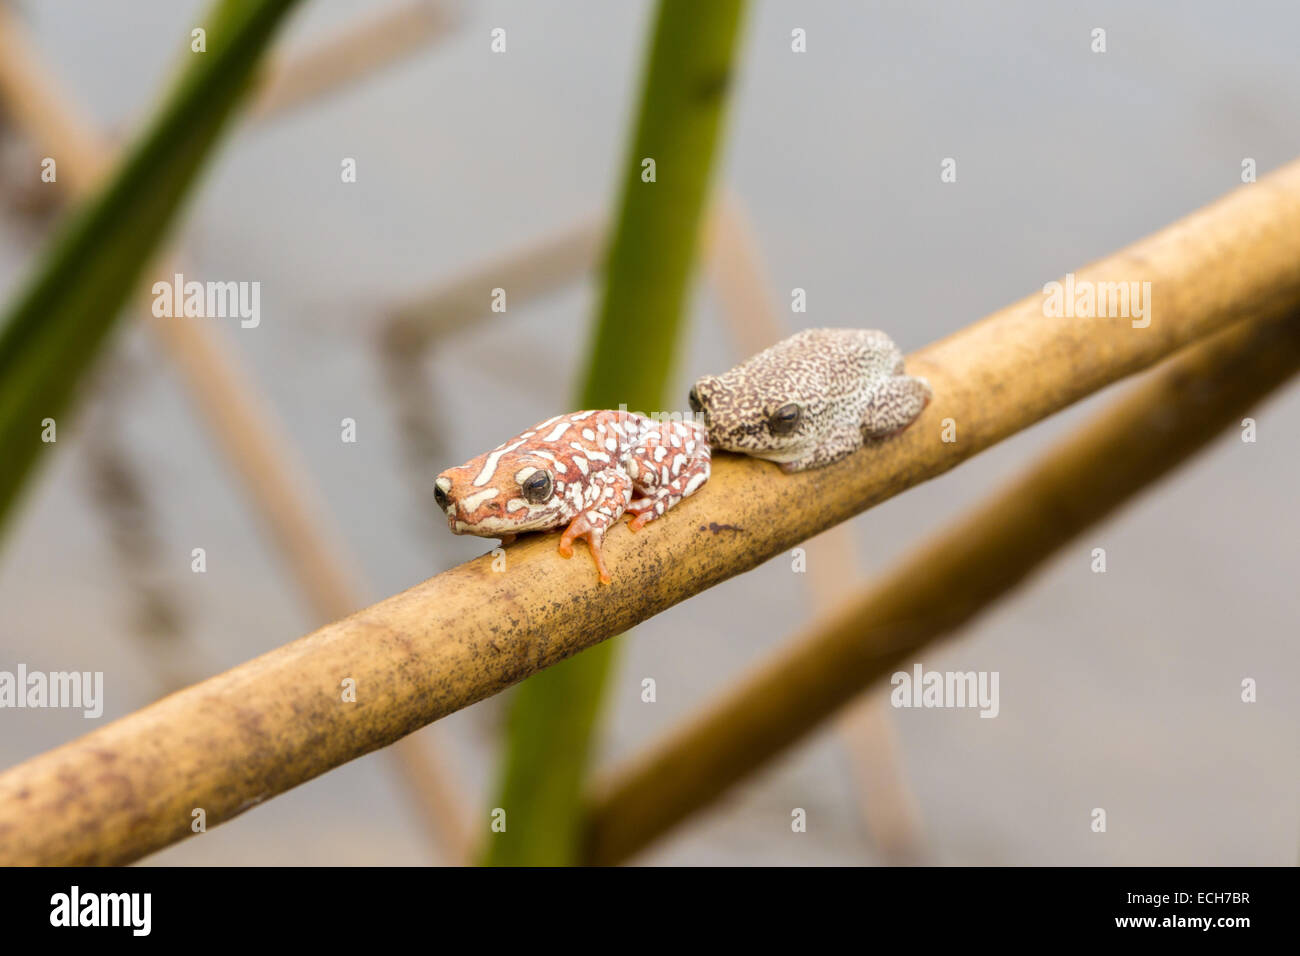 Two Marbled Reed Frogs (Hyperolius marmoratus) sitting a twig in the swamps of the Okavango Delta, Botswana Stock Photo